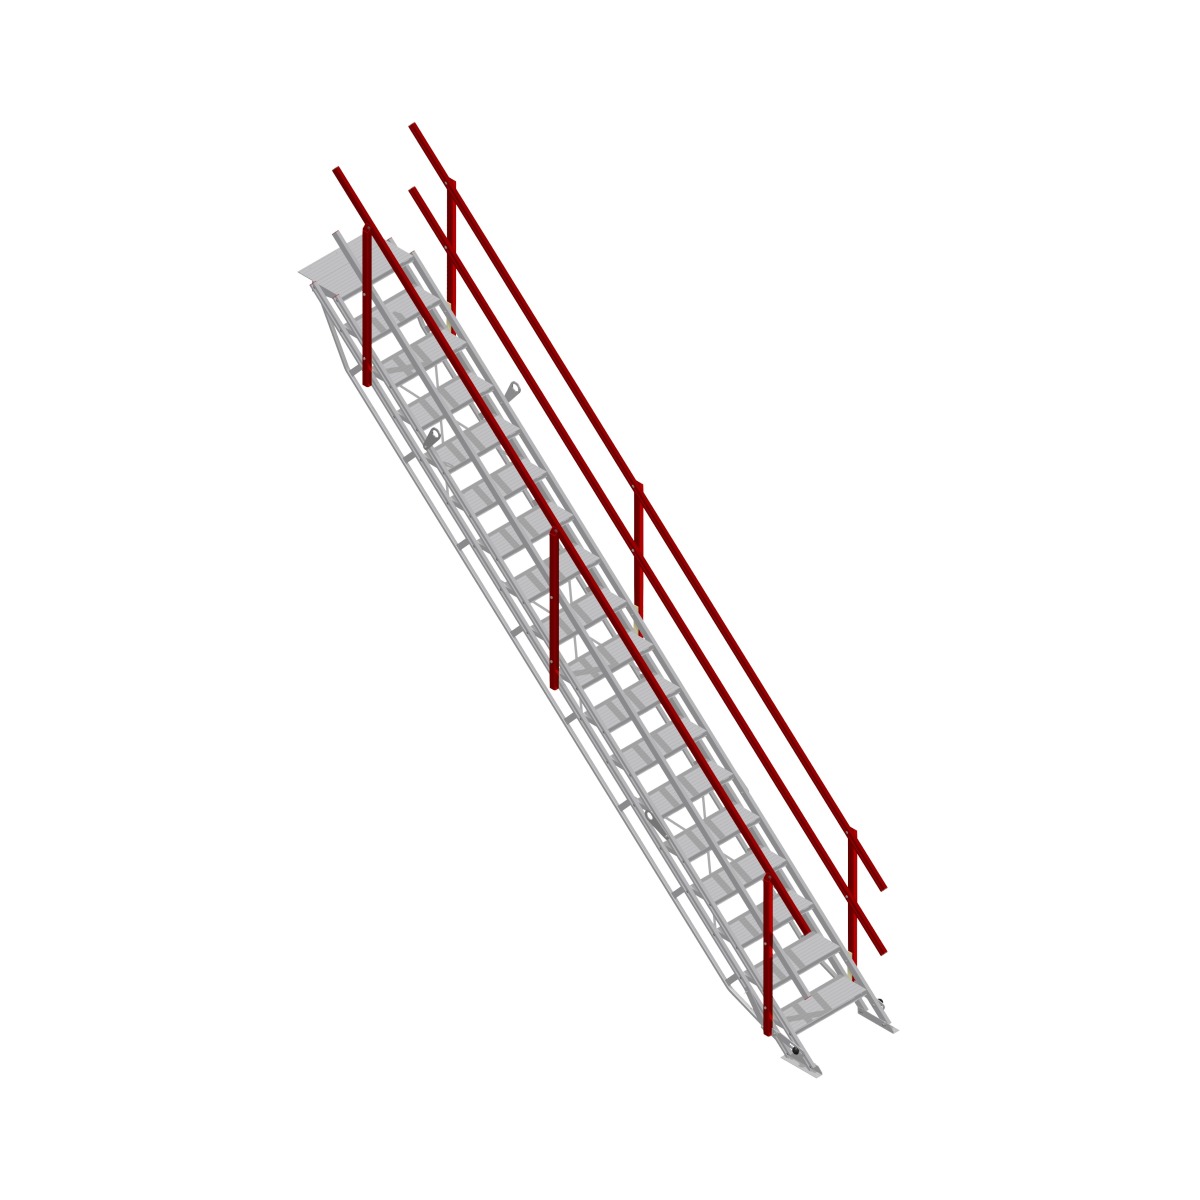 Buy Self-Levelling Stairs - Fixed in Stairs and Truck Access from Easy Access available at Astrolift NZ